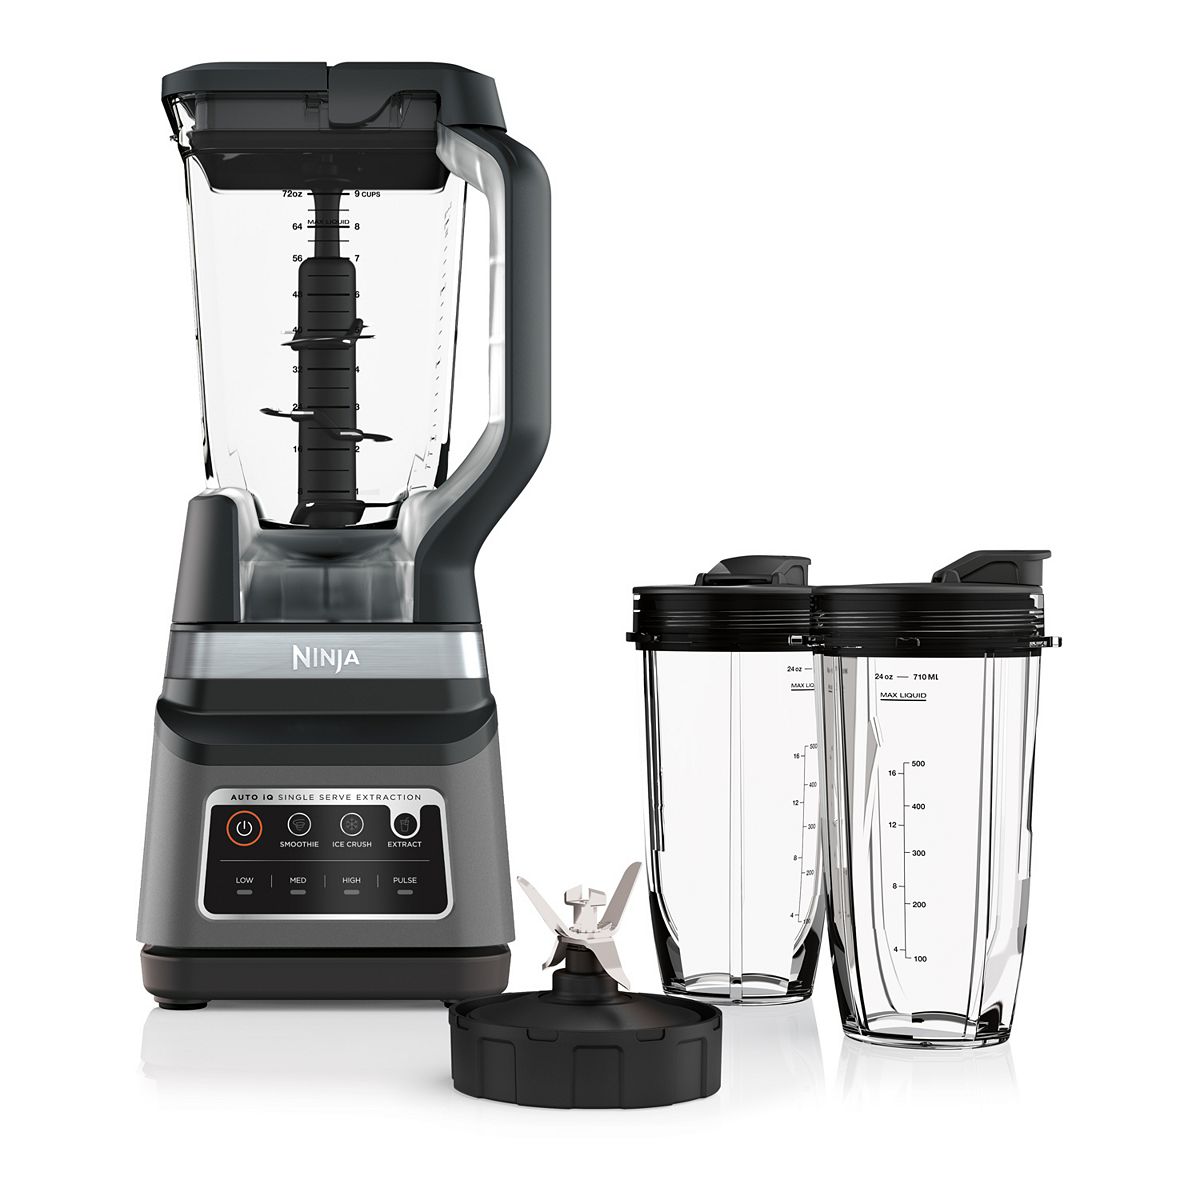 Shop the best Cyber Monday kitchen deals from Bloomingdale's, Sur